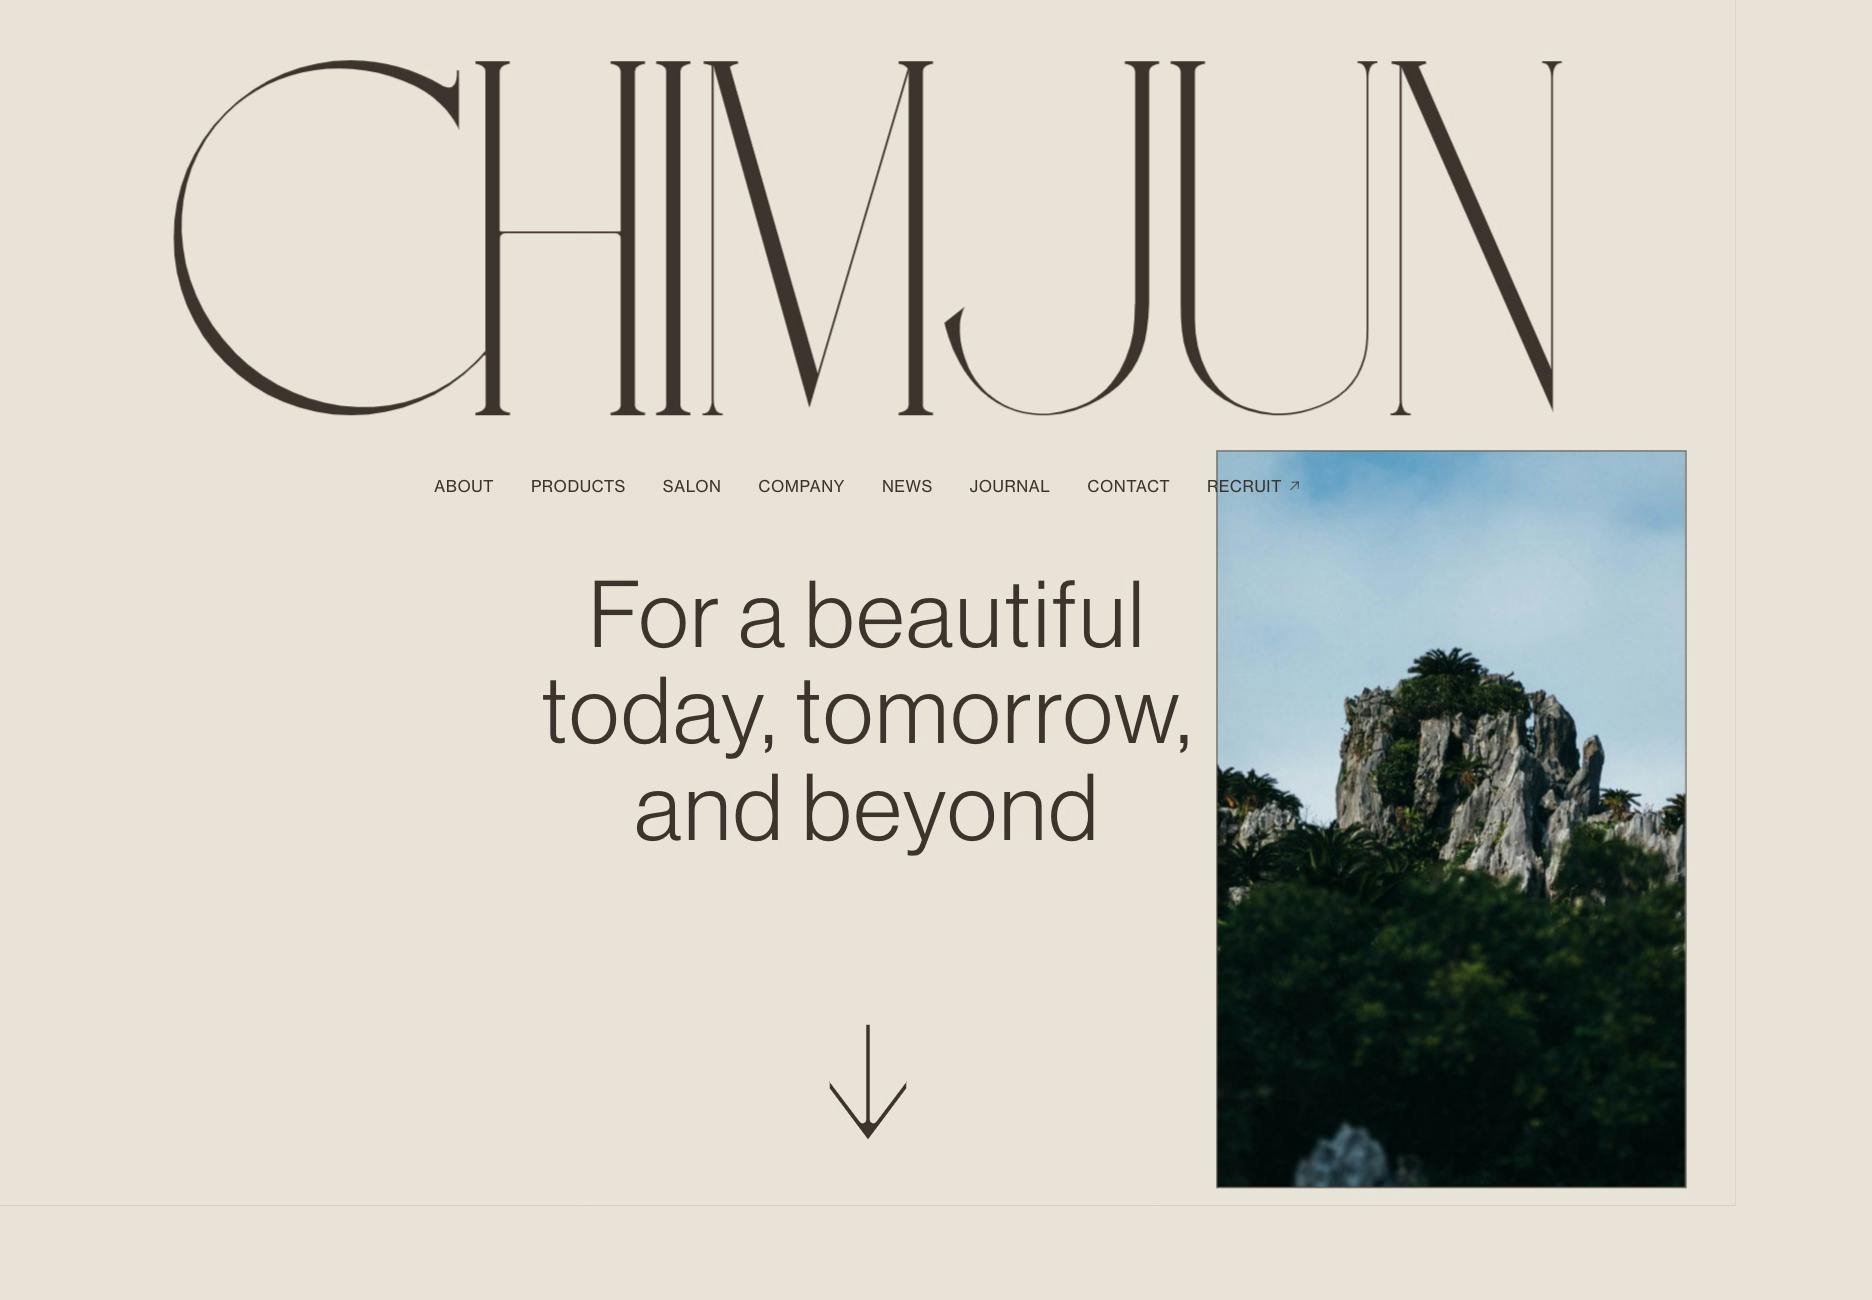 Cover Image for CHIMJUN